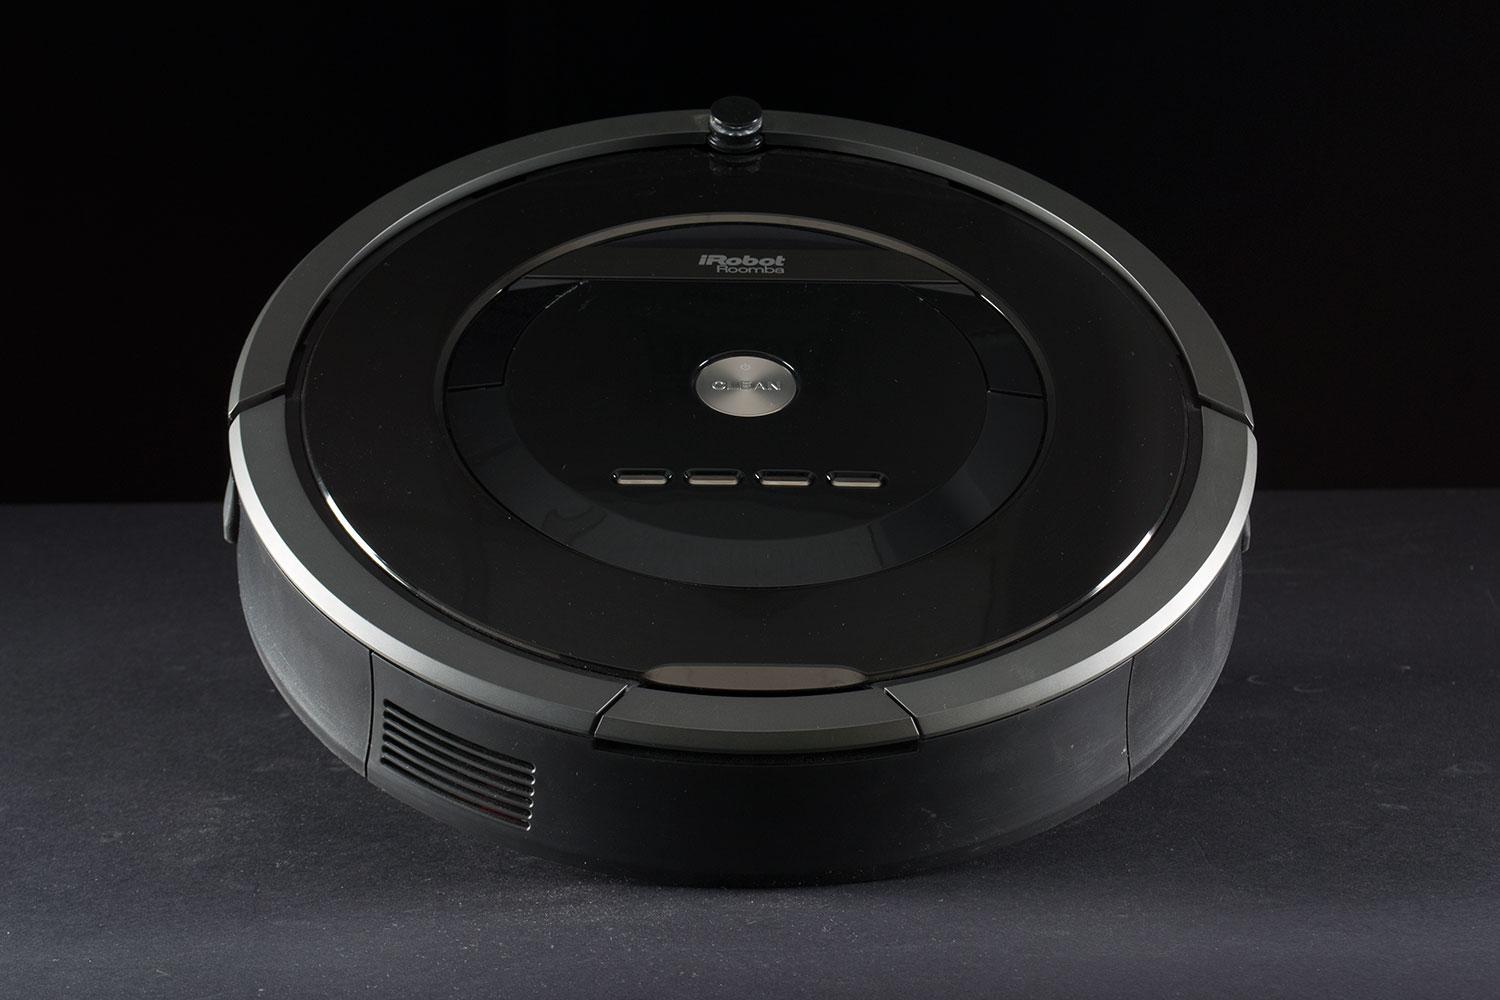 iRobot Roomba 880 review: This bot leaves the competition in the dust - CNET